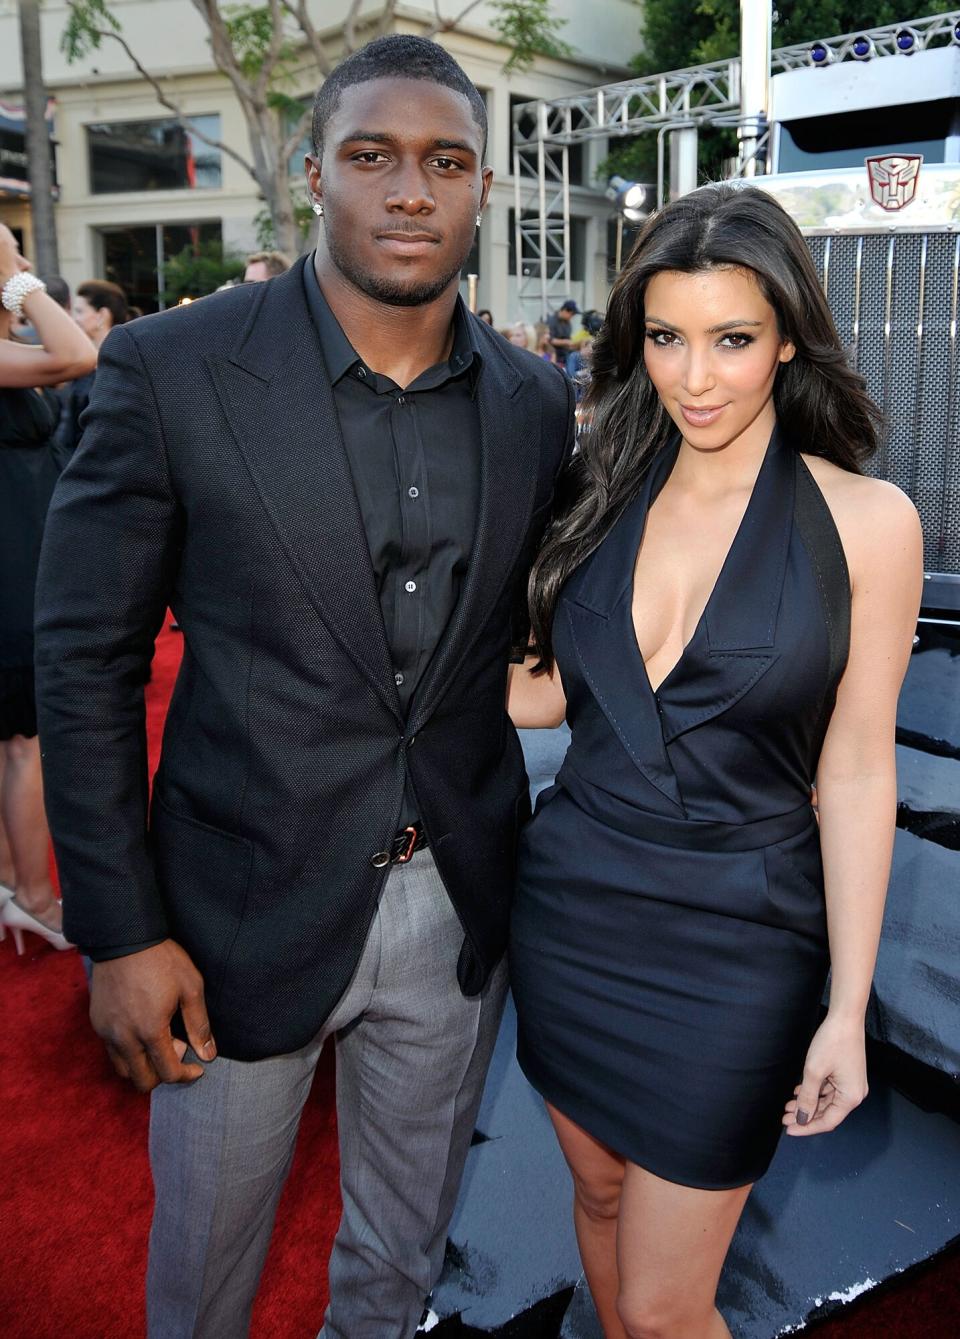 Reggie Bush (L) and TV personality Kim Kardashian arrive at the premiere of Dreamworks' "Transformers: Revenge Of The Fallen" held at Mann Village Theatre on June 22, 2009 in Los Angeles, California